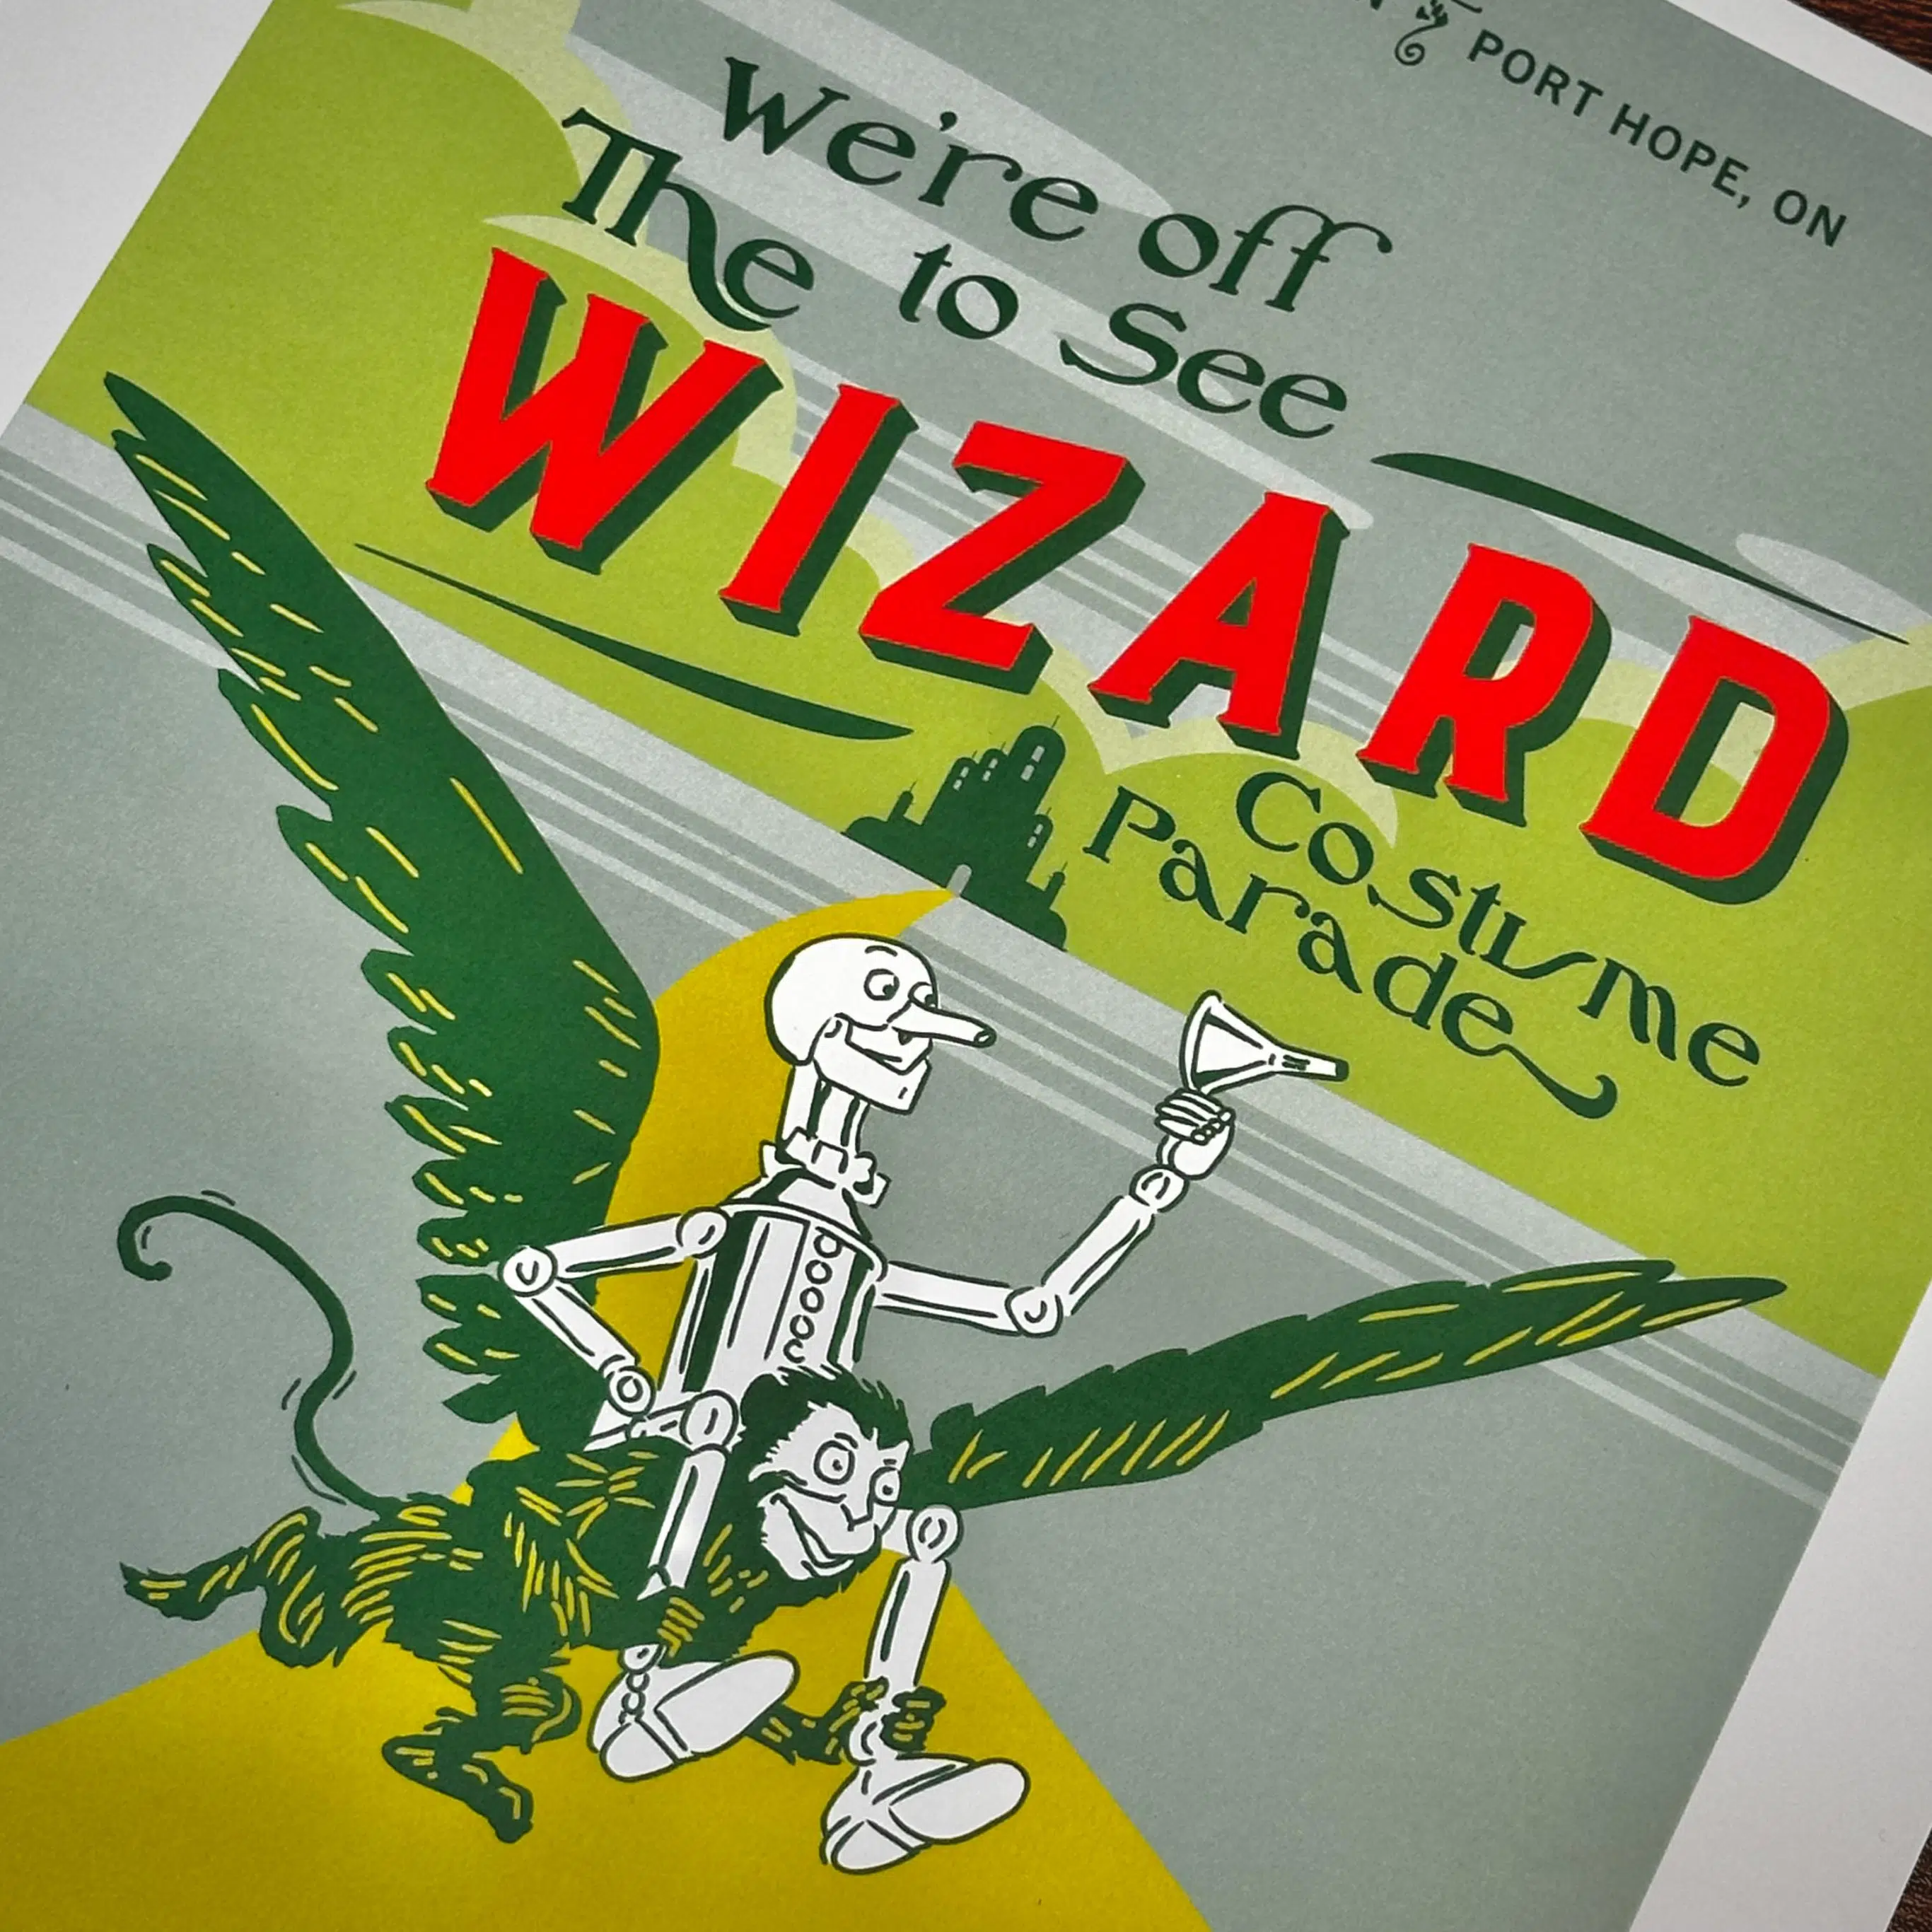 Fantastic Friday: We're off to see the Wizard